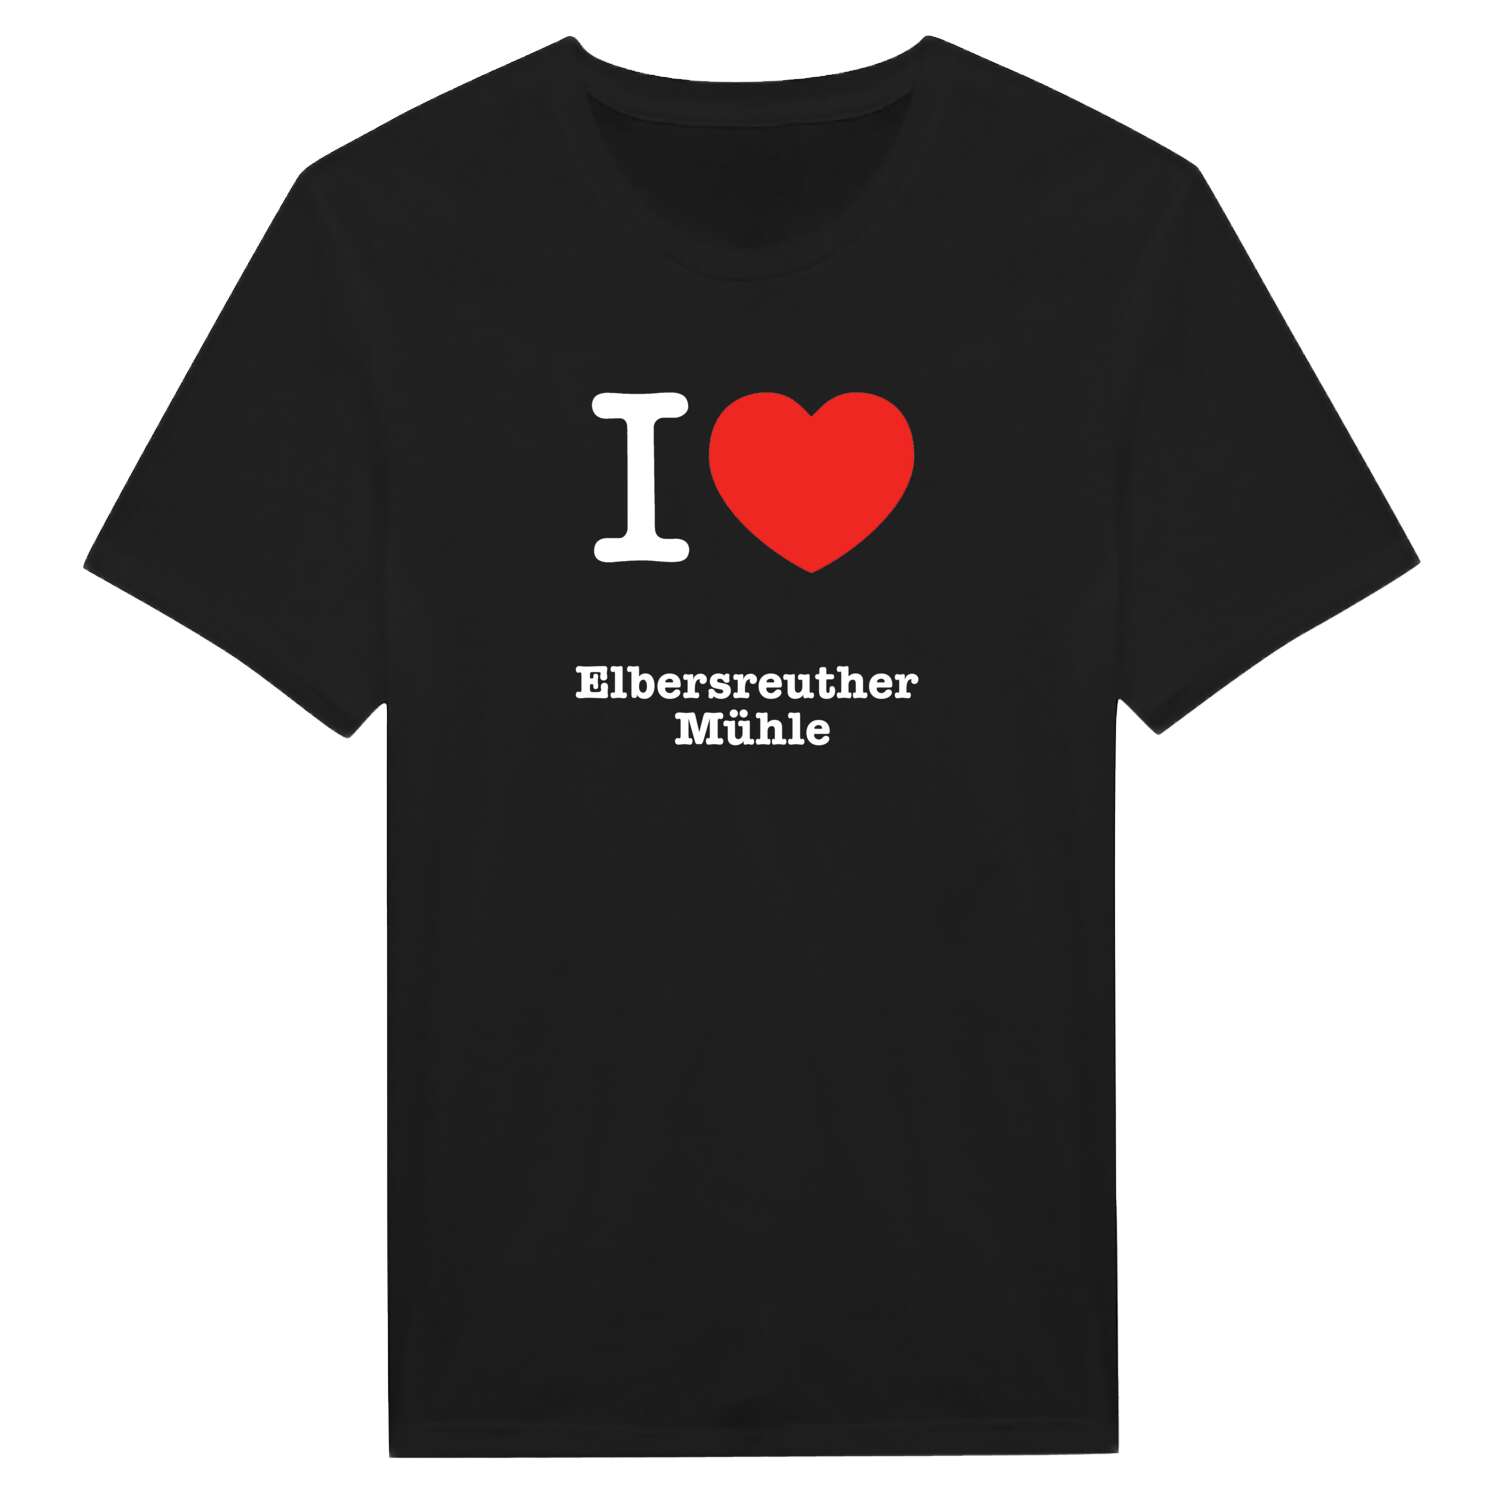 Elbersreuther Mühle T-Shirt »I love«